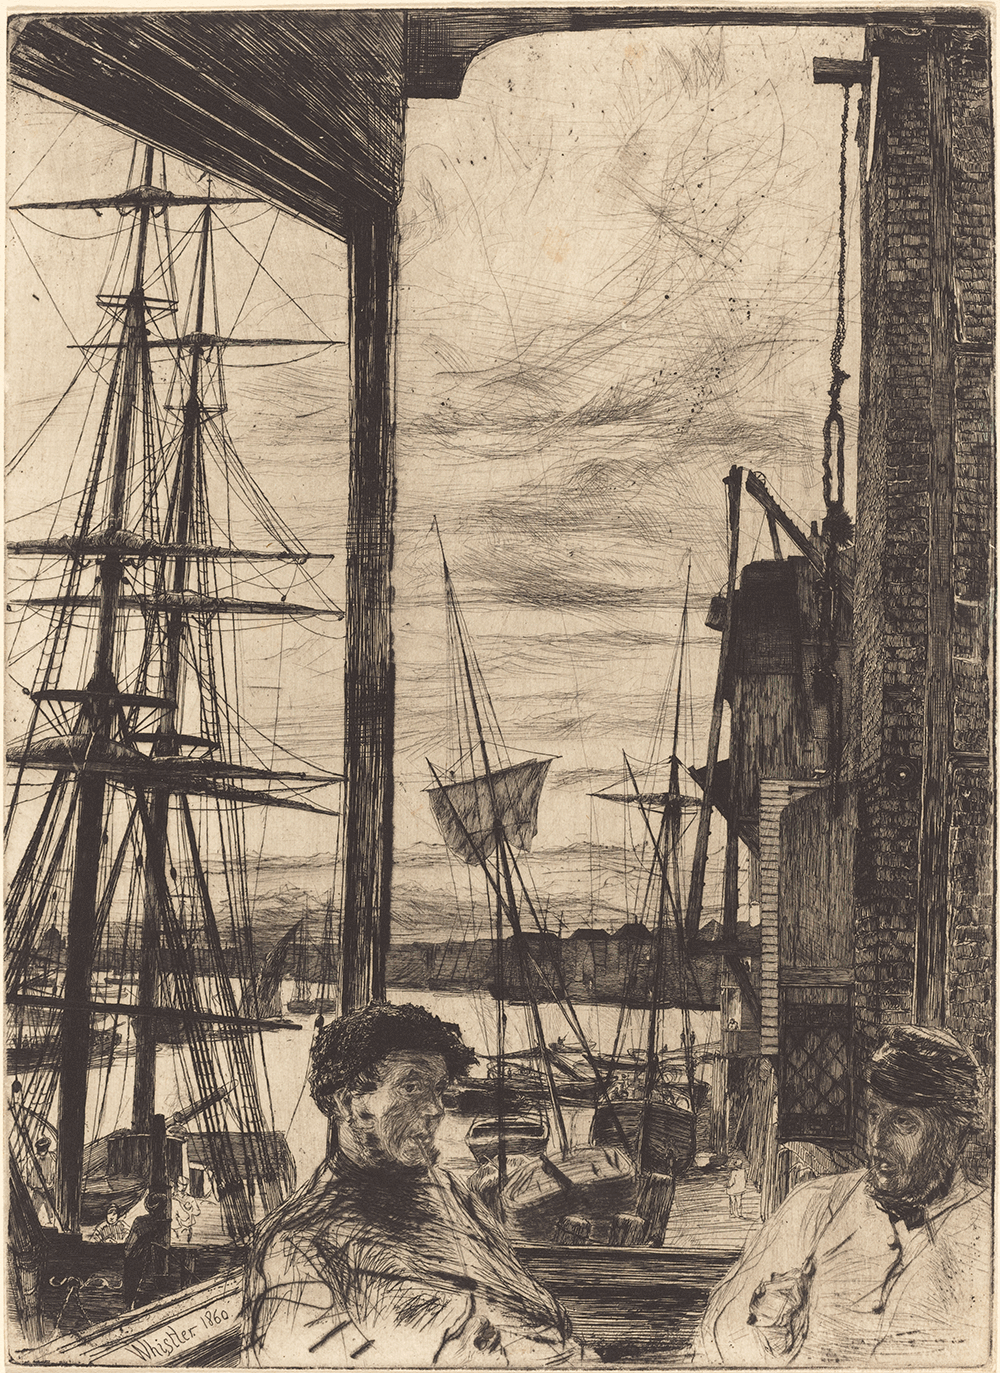 James McNeill Whistler_Rotherhithe, 1860_5158-064_W